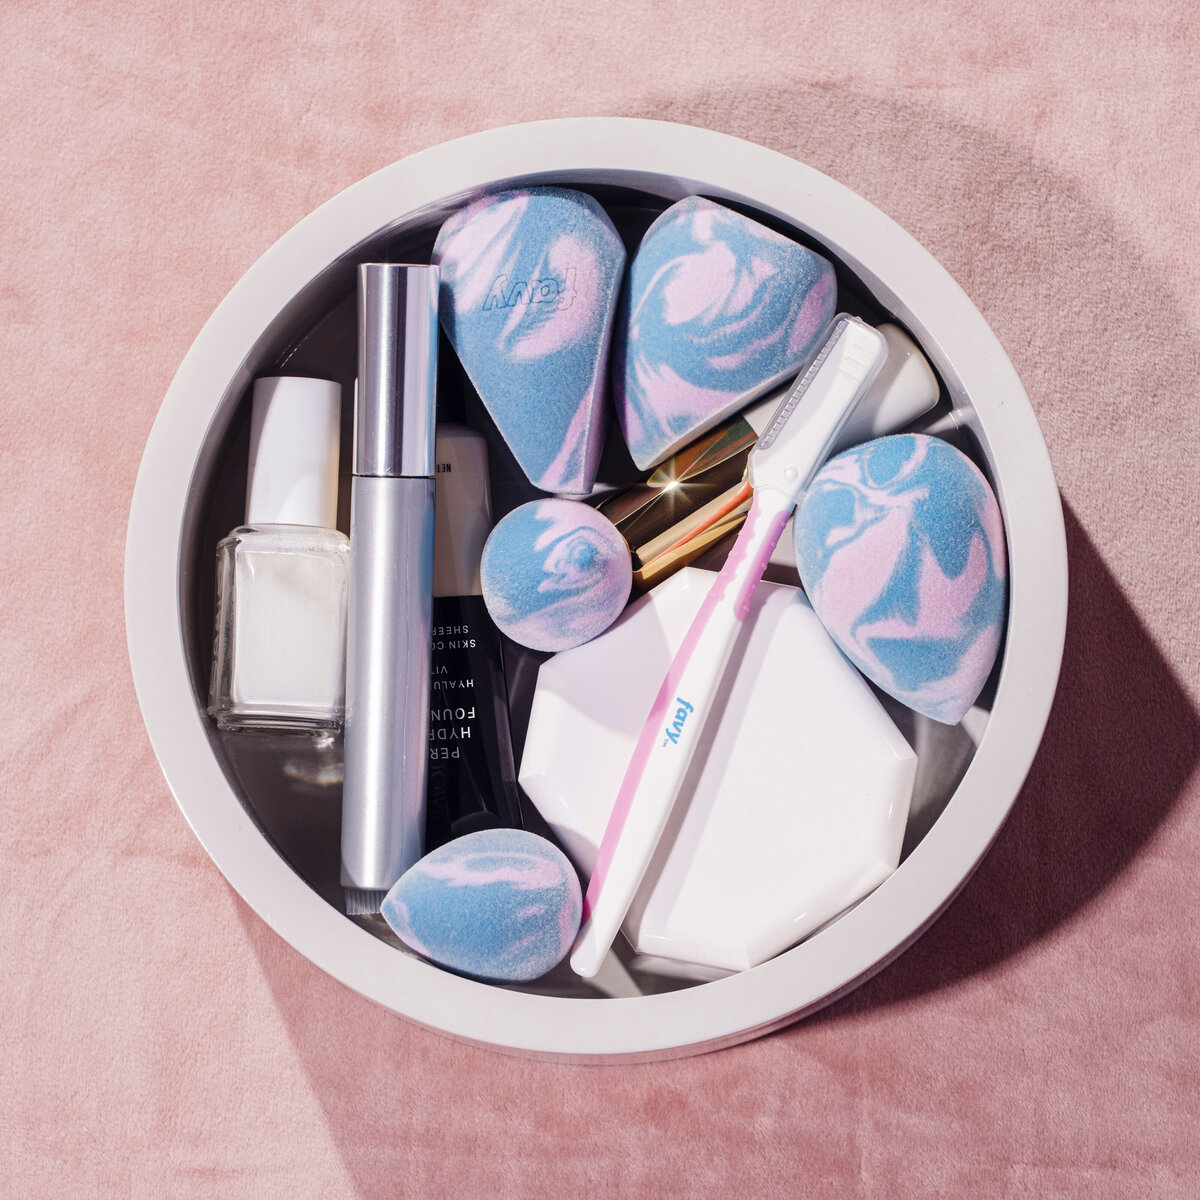 Bowl filled with beauty products